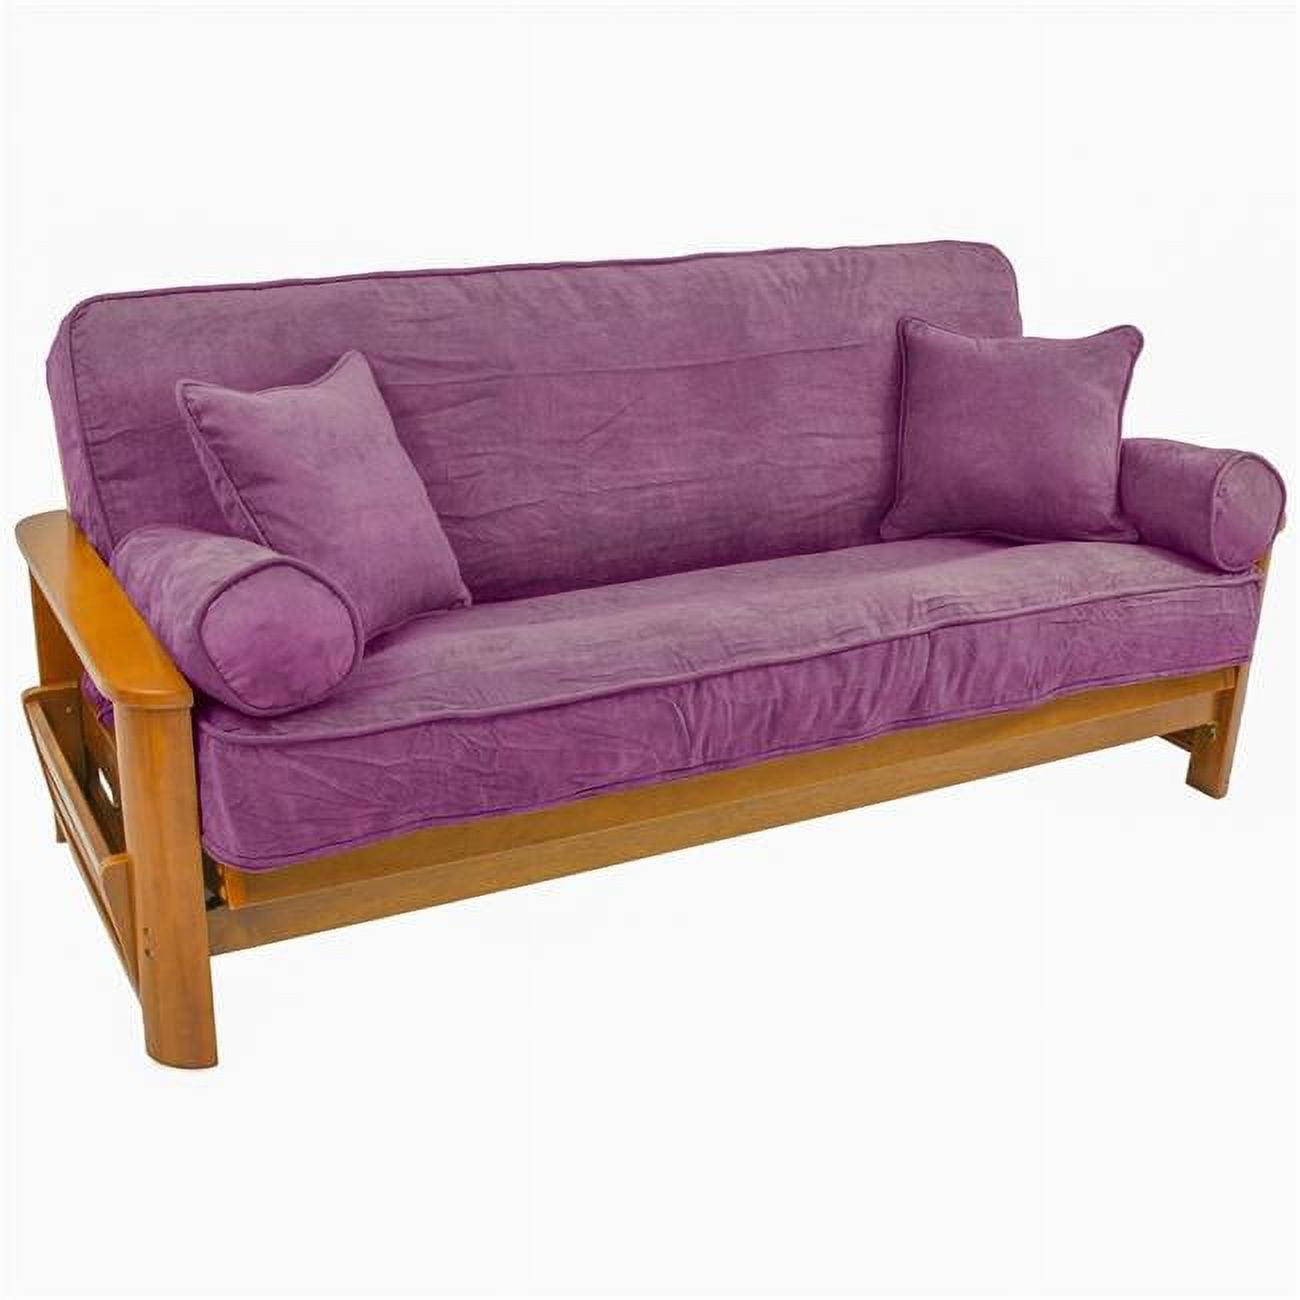 Picture of Blazing Needles 9680-CD-MS-UV 8 to 9 in. Solid Microsuede Double Corded Full Futon Cover Set with Four Throw Pillows, Ultra Violet - Set of 5